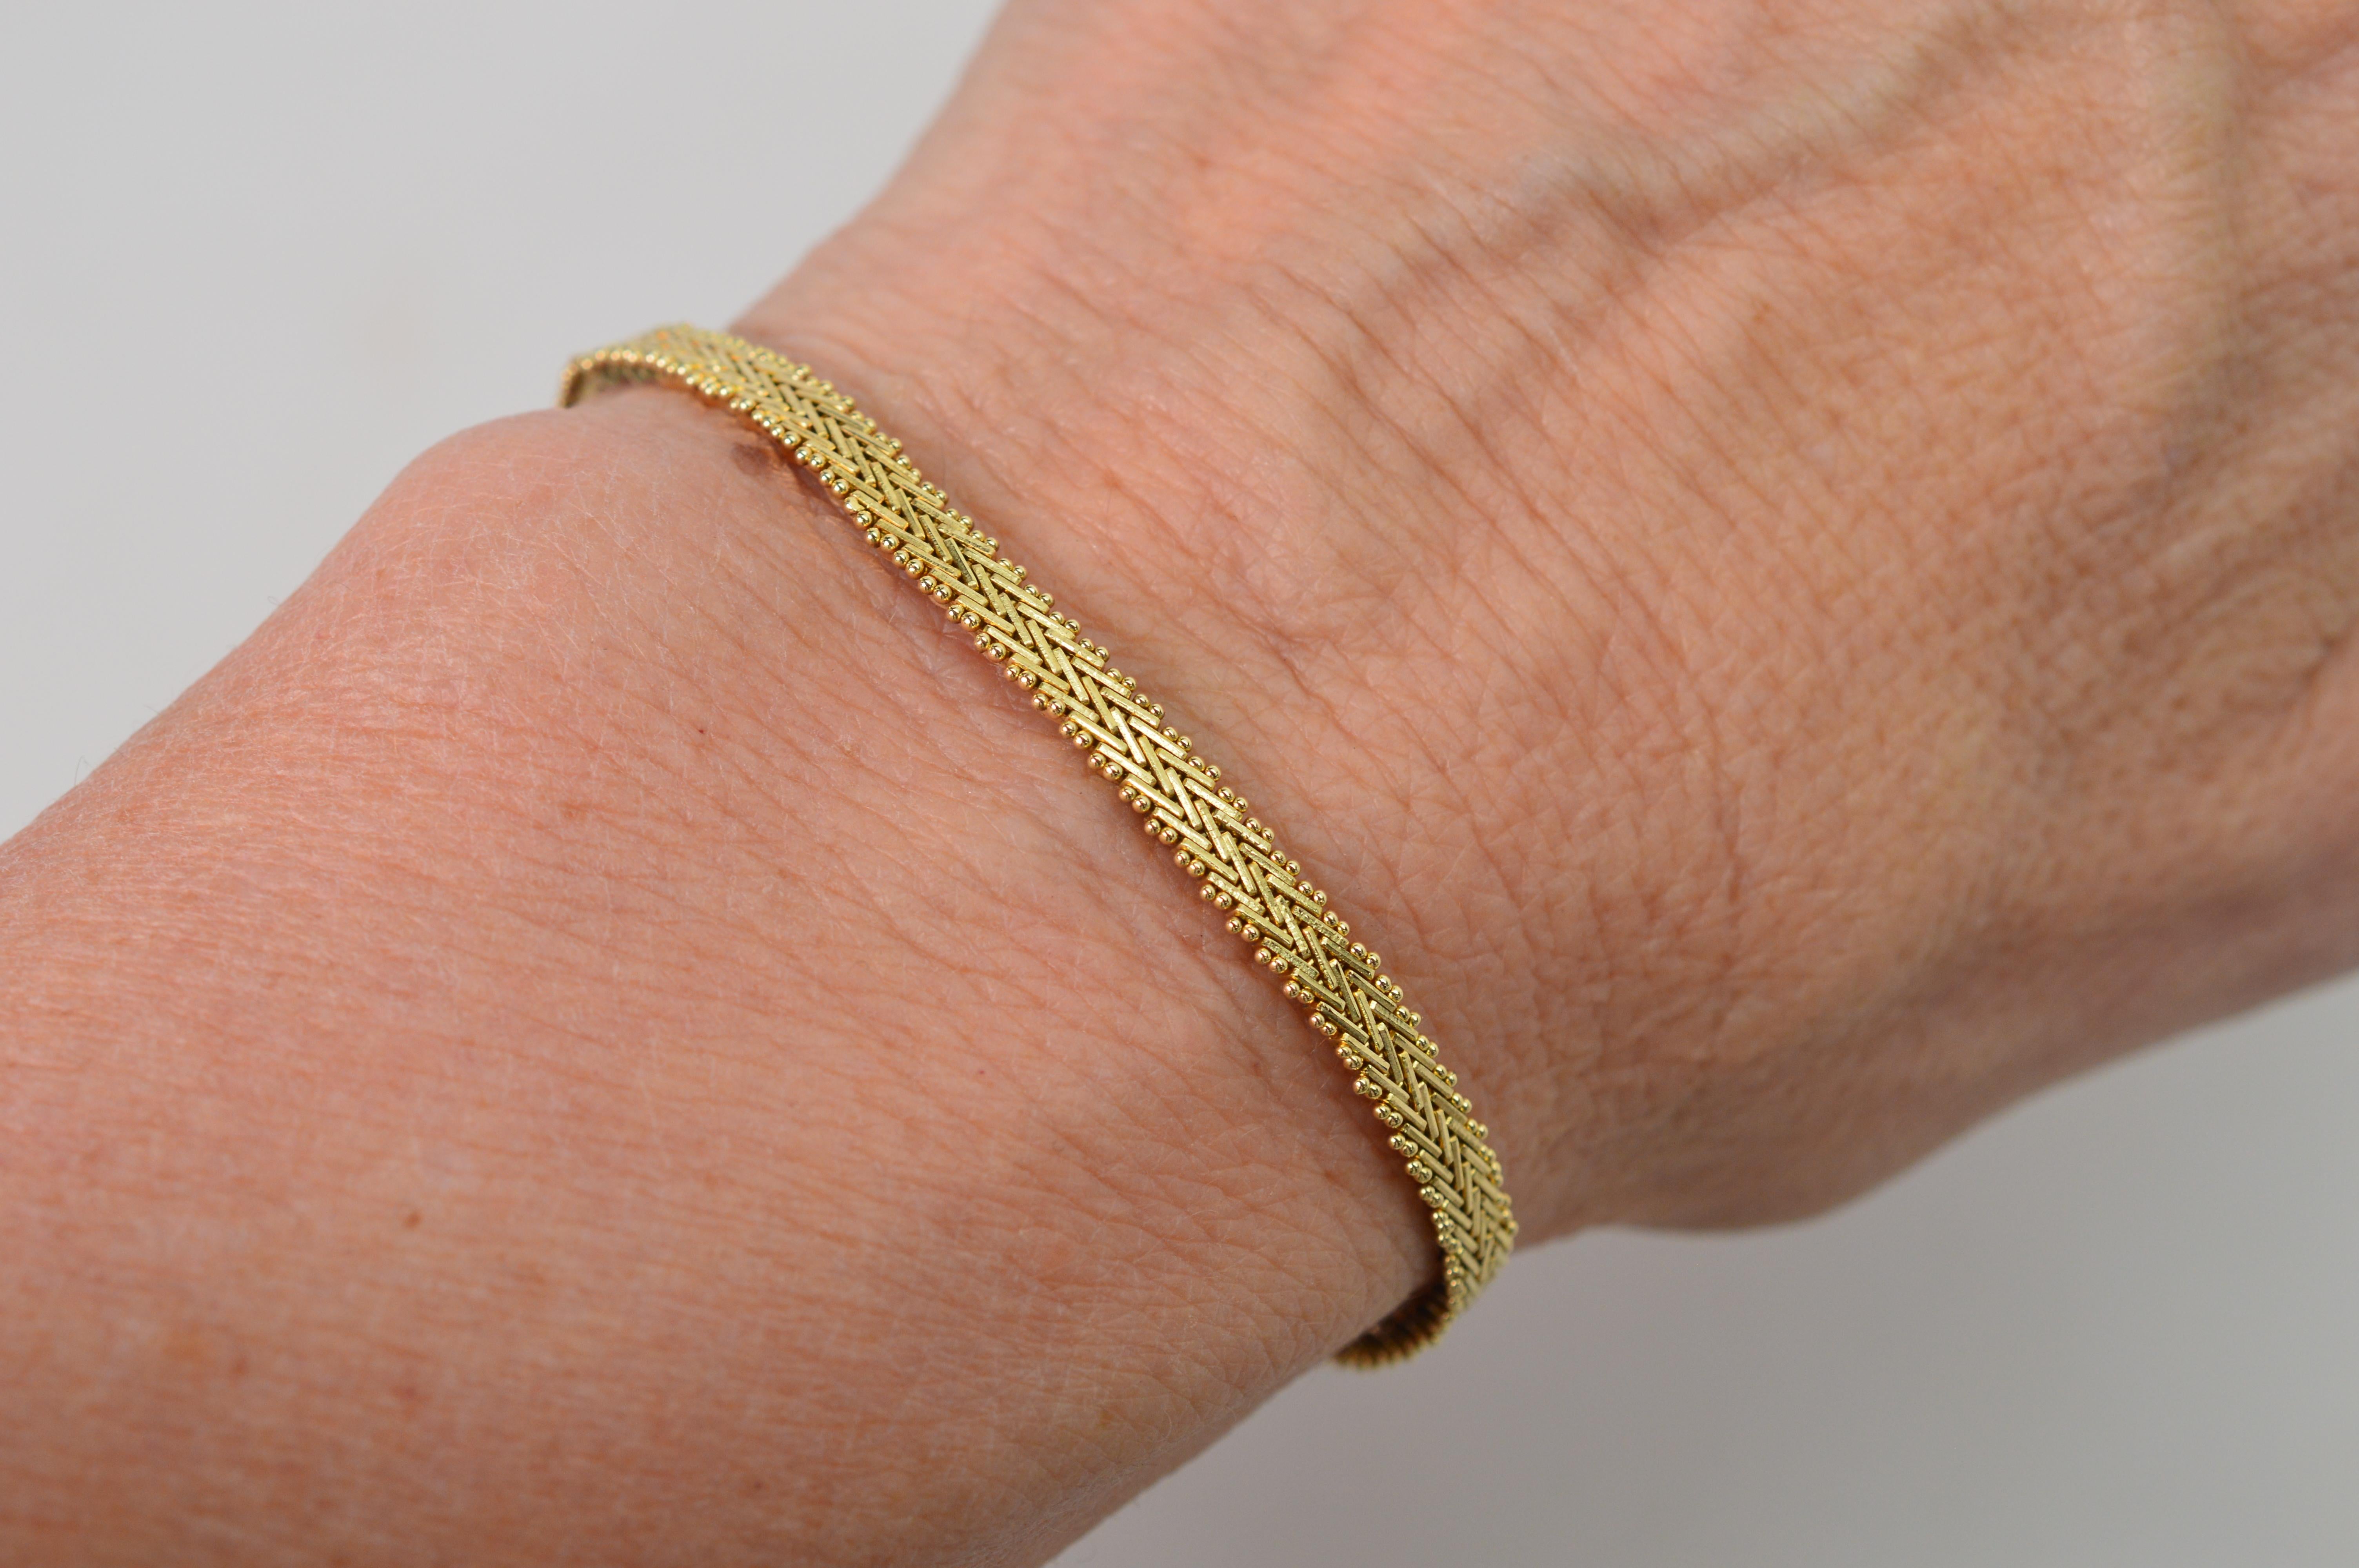 Sleek and slim, this classic herringbone pattern bracelet in fourteen carat 14k yellow gold is a jewelry wardrobe work horse. Pretty to wear on its own with plenty of shine from it textured pattern plus perfect for stacking with other jewelry